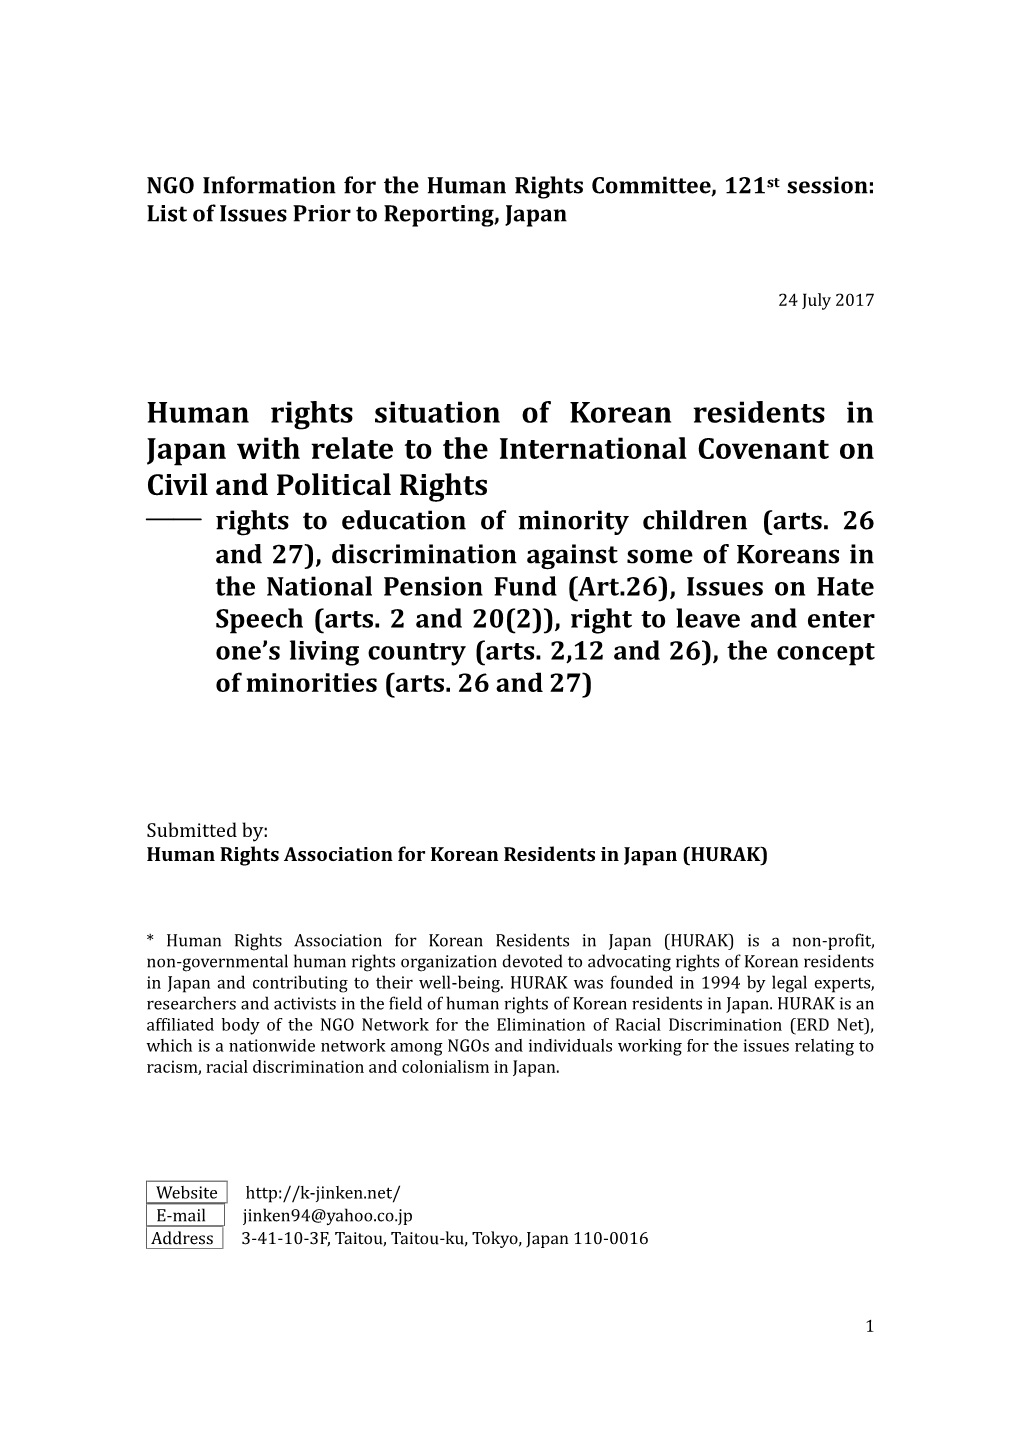 Human Rights Situation of Korean Residents in Japan with Relate to the International Covenant on Civil and Political Rights